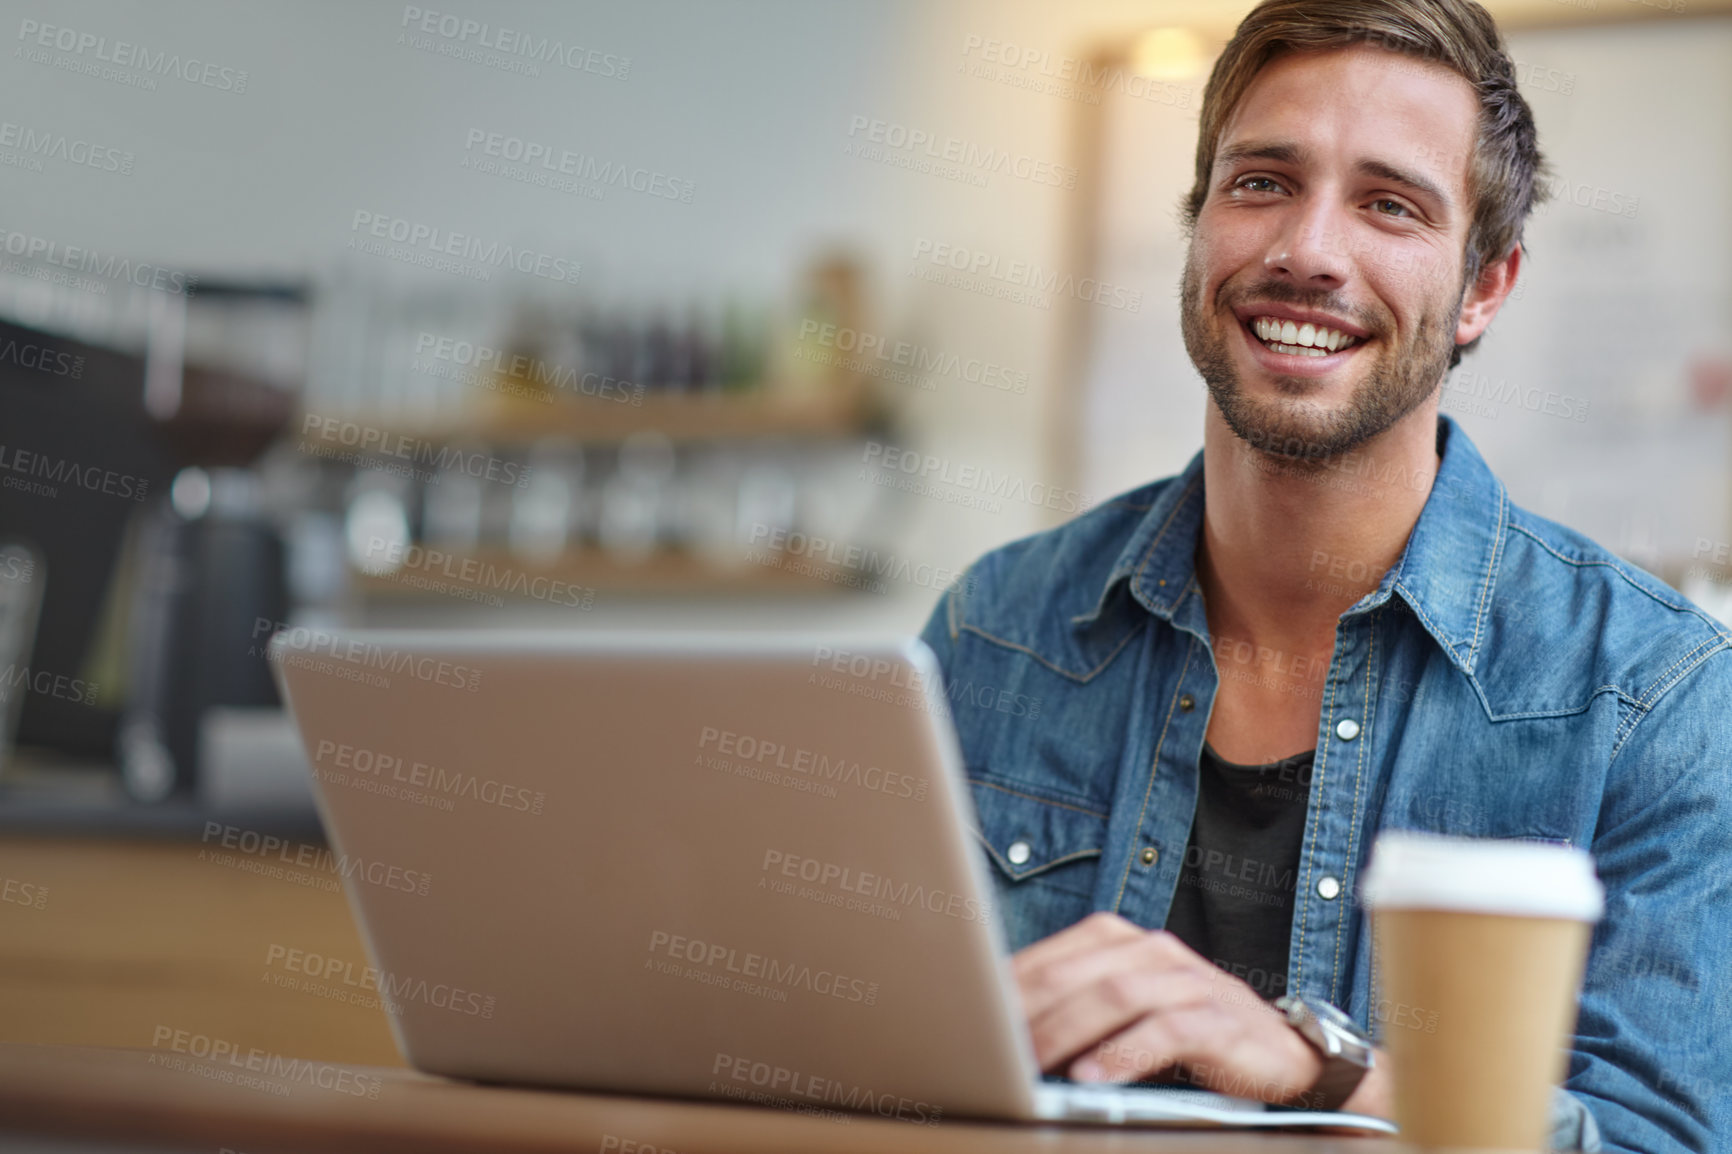 Buy stock photo Shot of a handsome young man using his laptop in a coffee shop